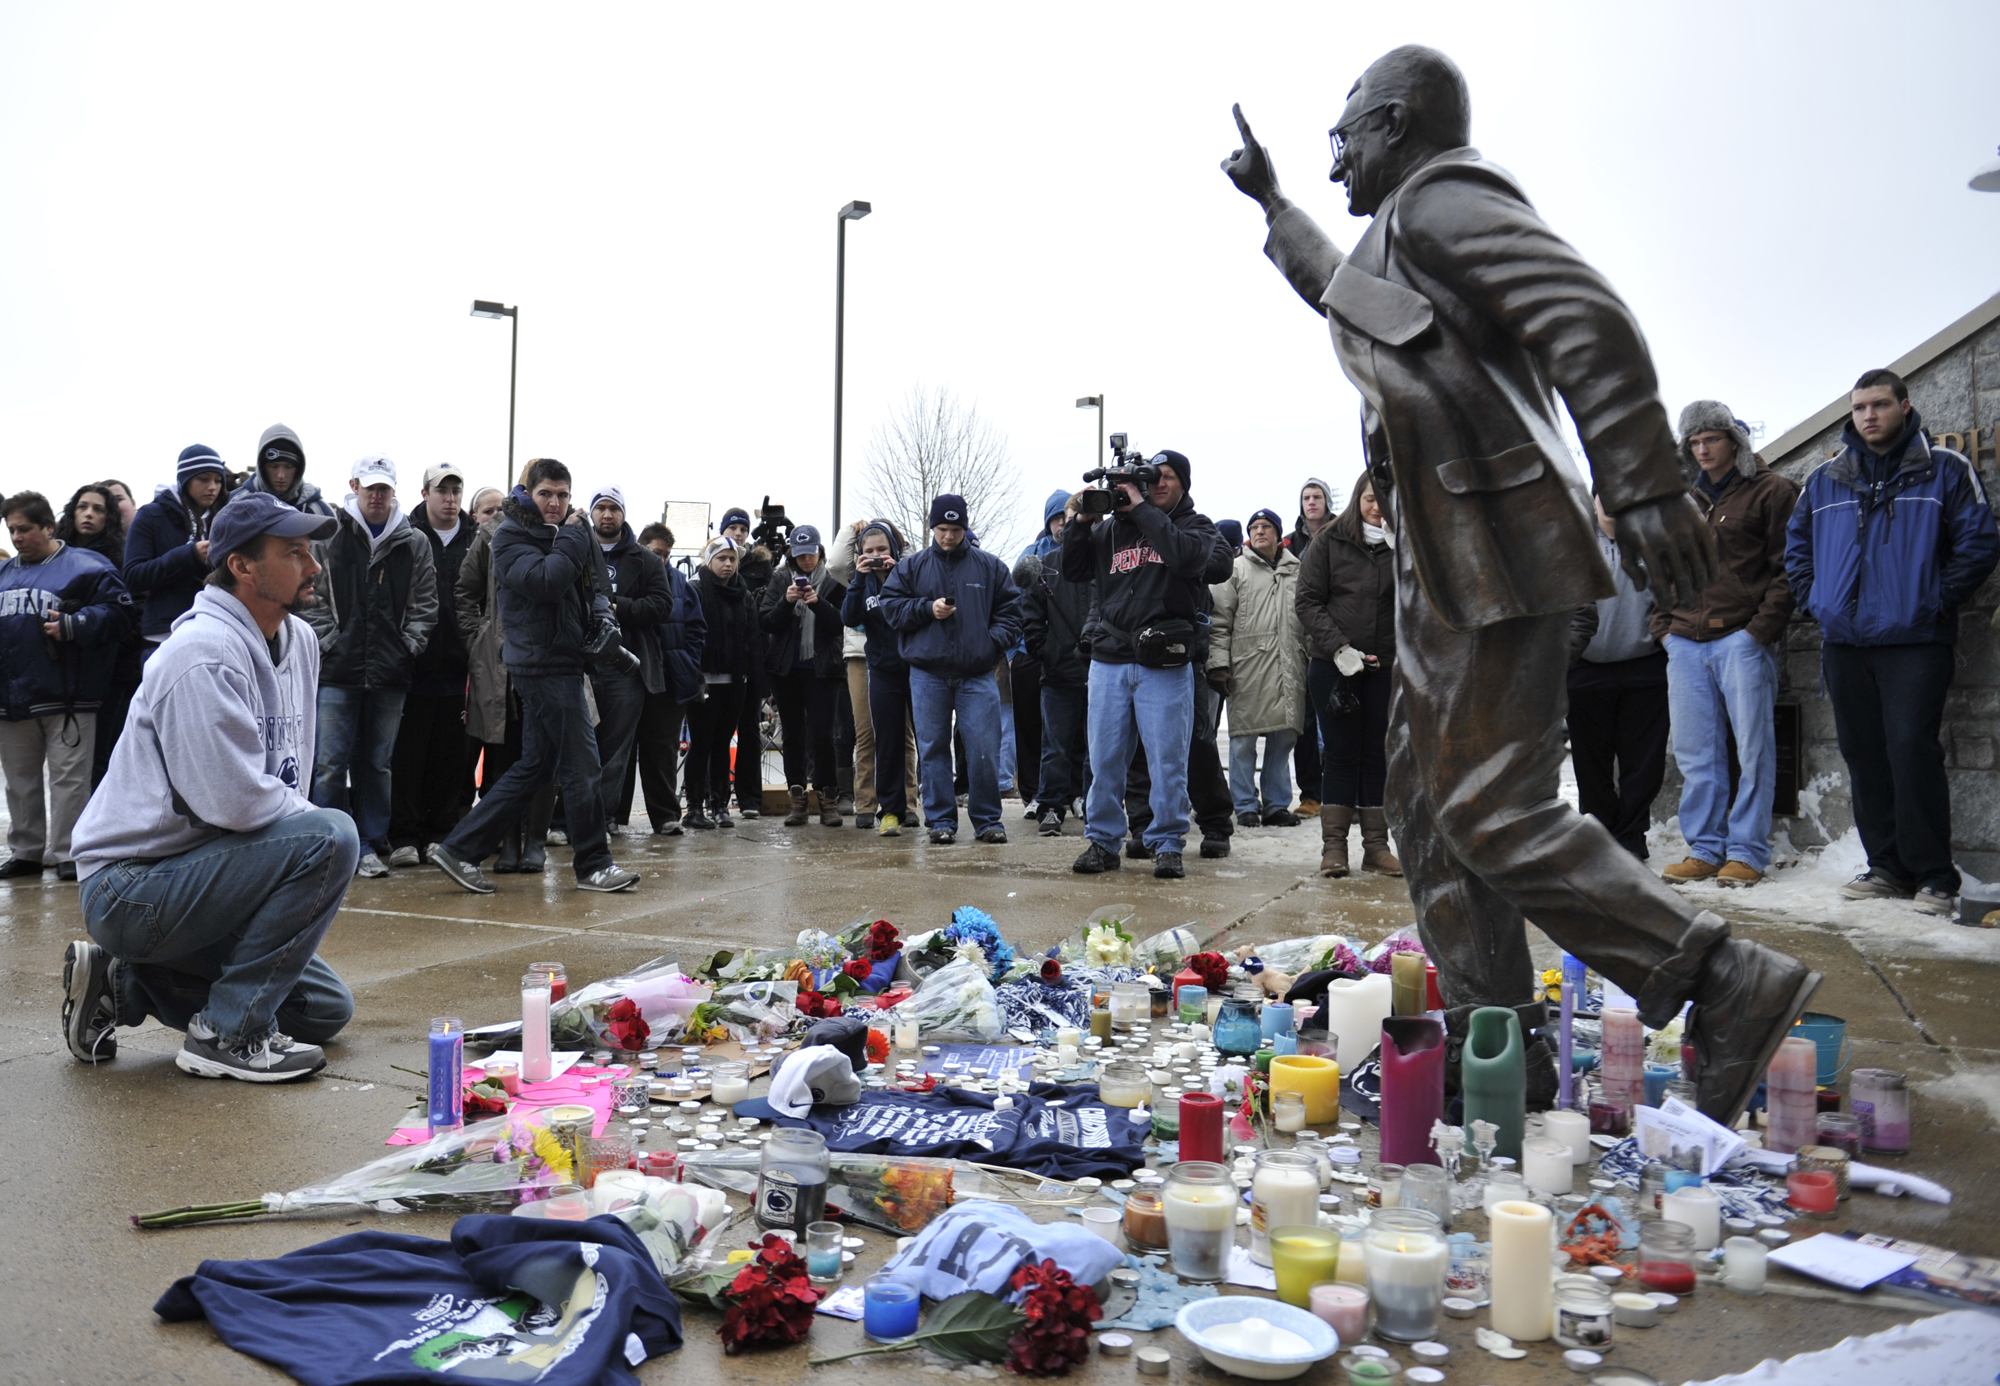  A mourner kneels in front of the Joe Paterno statue on Sunday, Jan. 22, 2012 where a crowd had gathered upon hearing news of his death. 